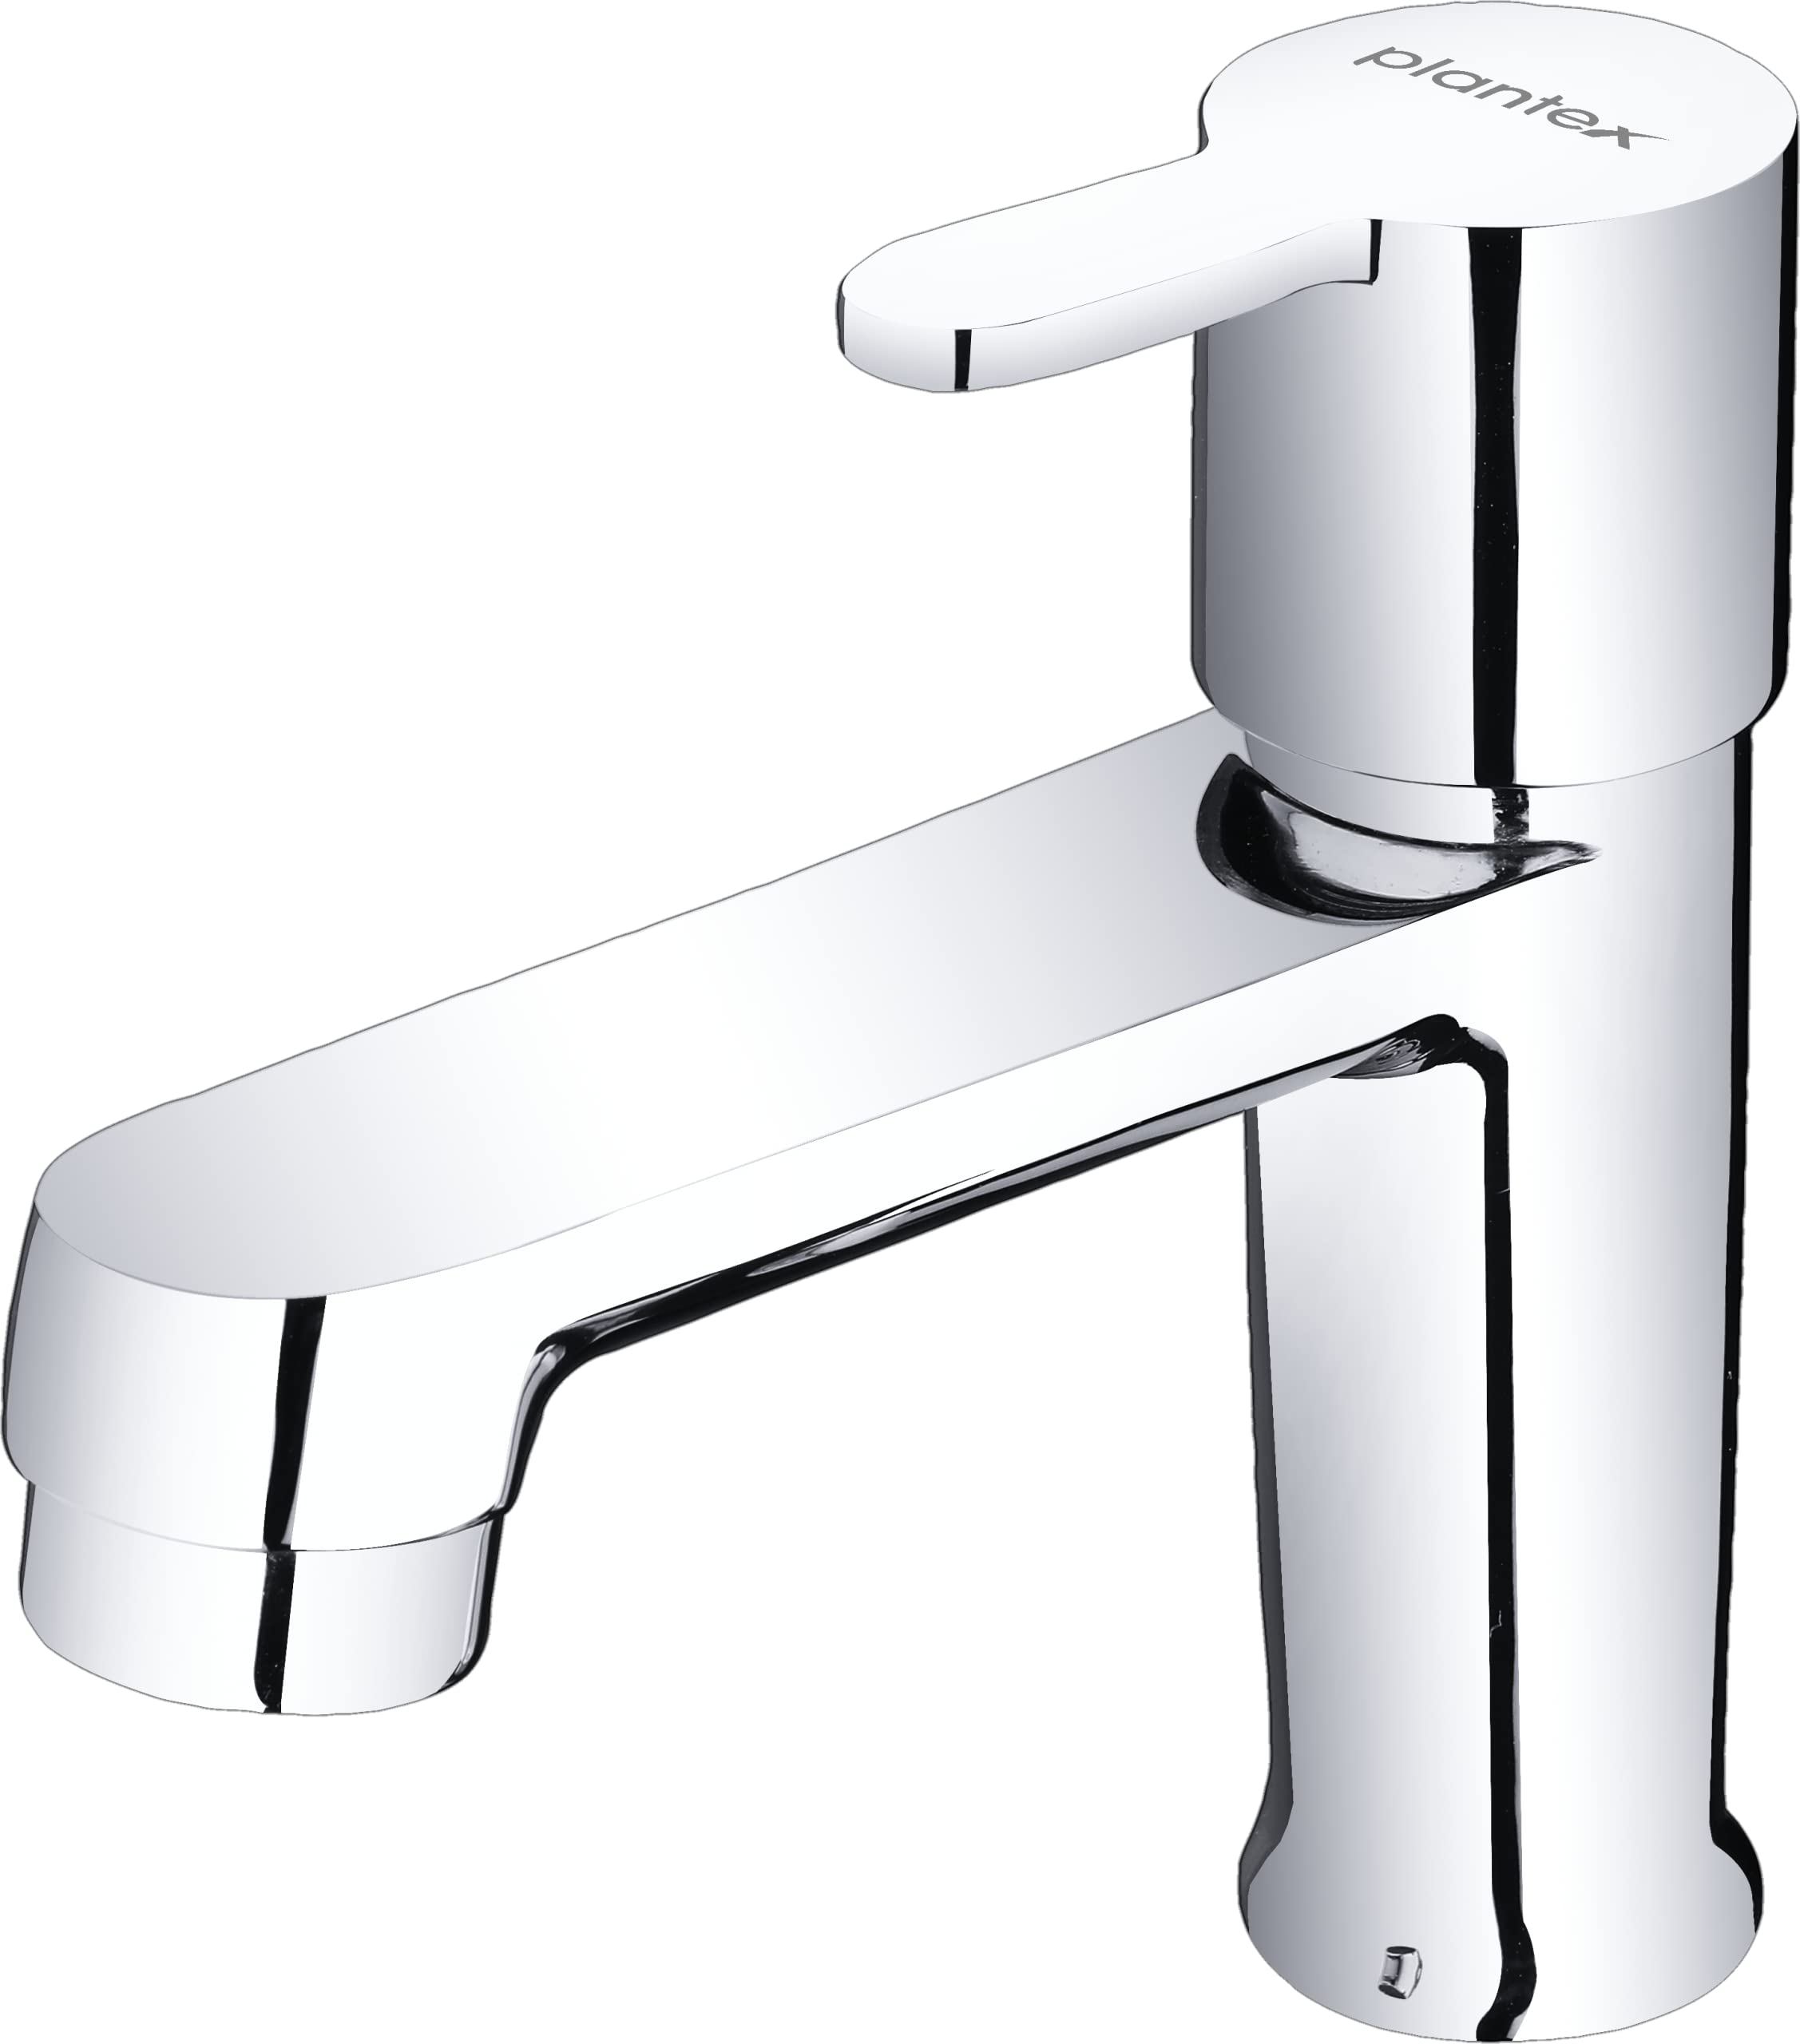 Plantex Pure Brass FLO-803 Single Handle Bathroom Pillar Cocktail Tap for Wash Basin/Water Tap for Kitchen Sink with Teflon Tape (Mirror-Chrome Finish)